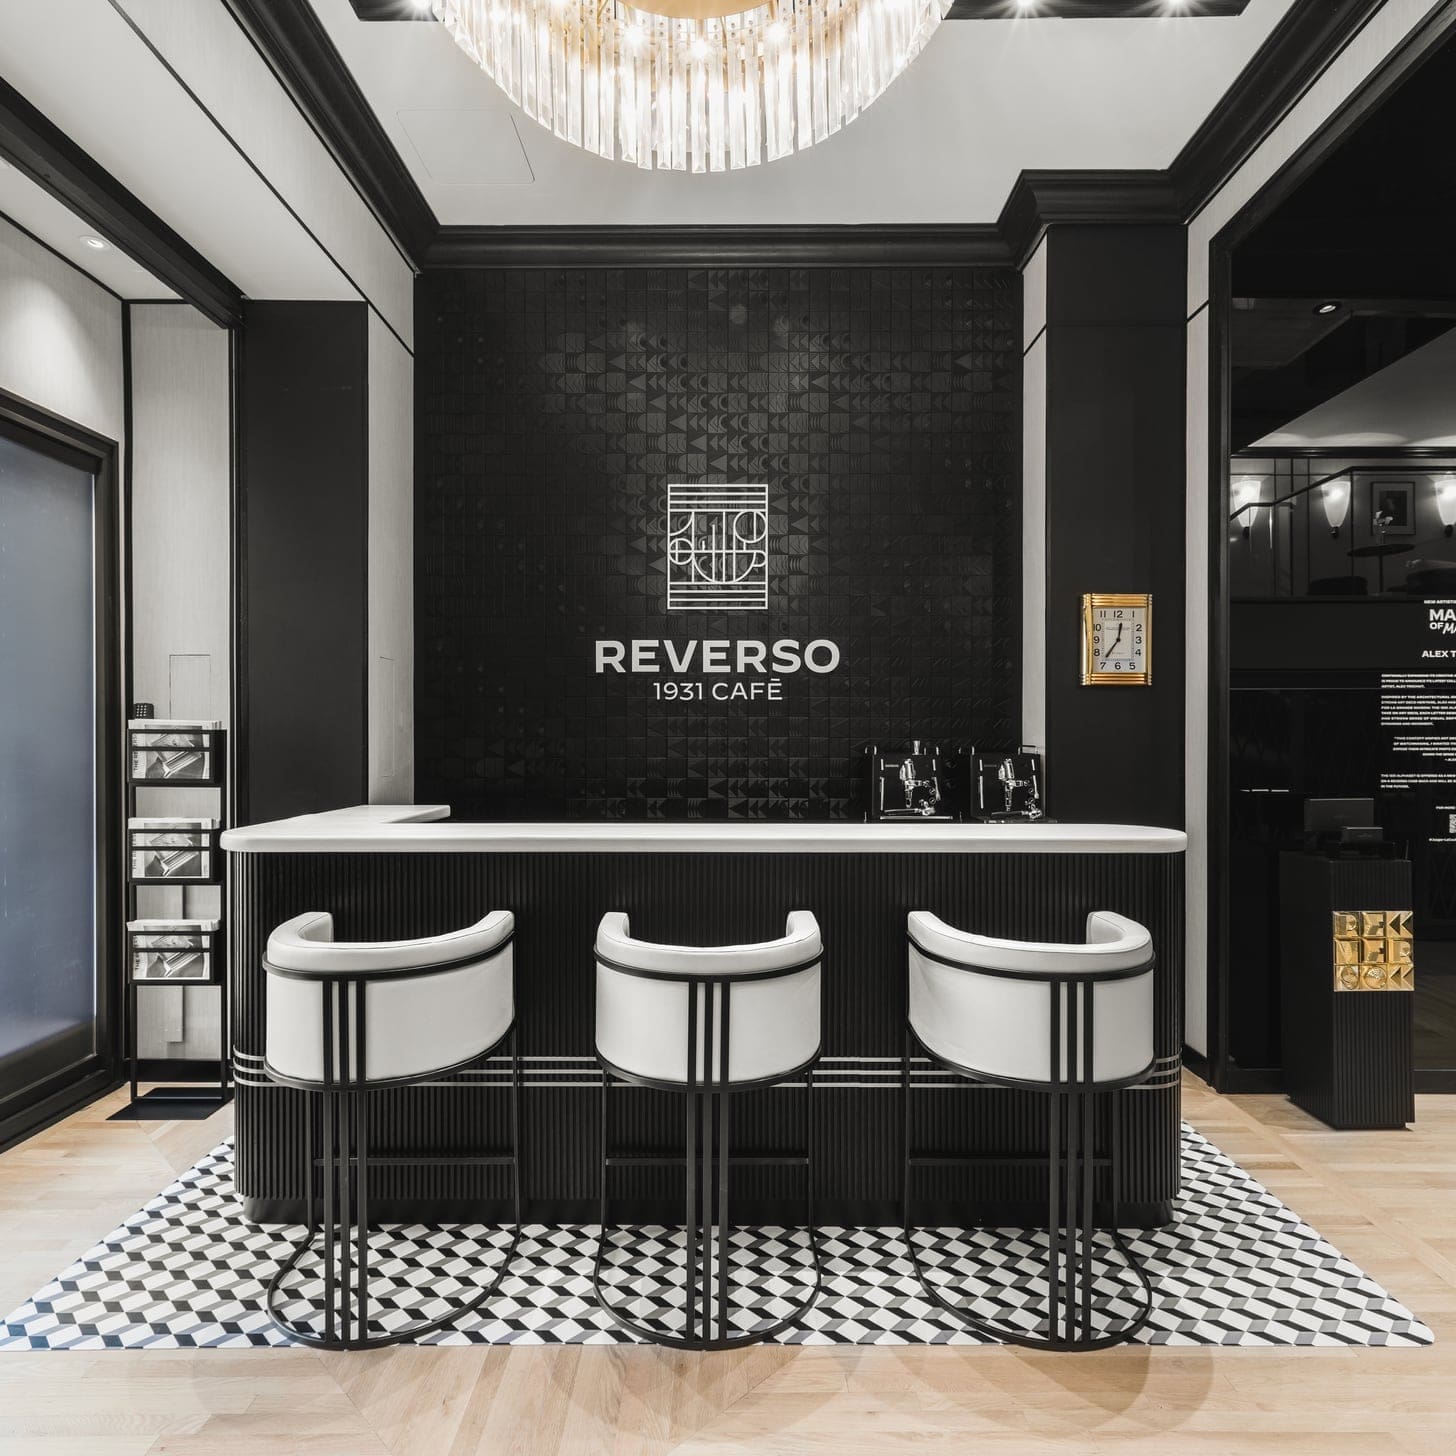 FRIDAY WIND DOWN: Jaeger-LeCoultre opens pop-up Reverso 1931 Café in NYC